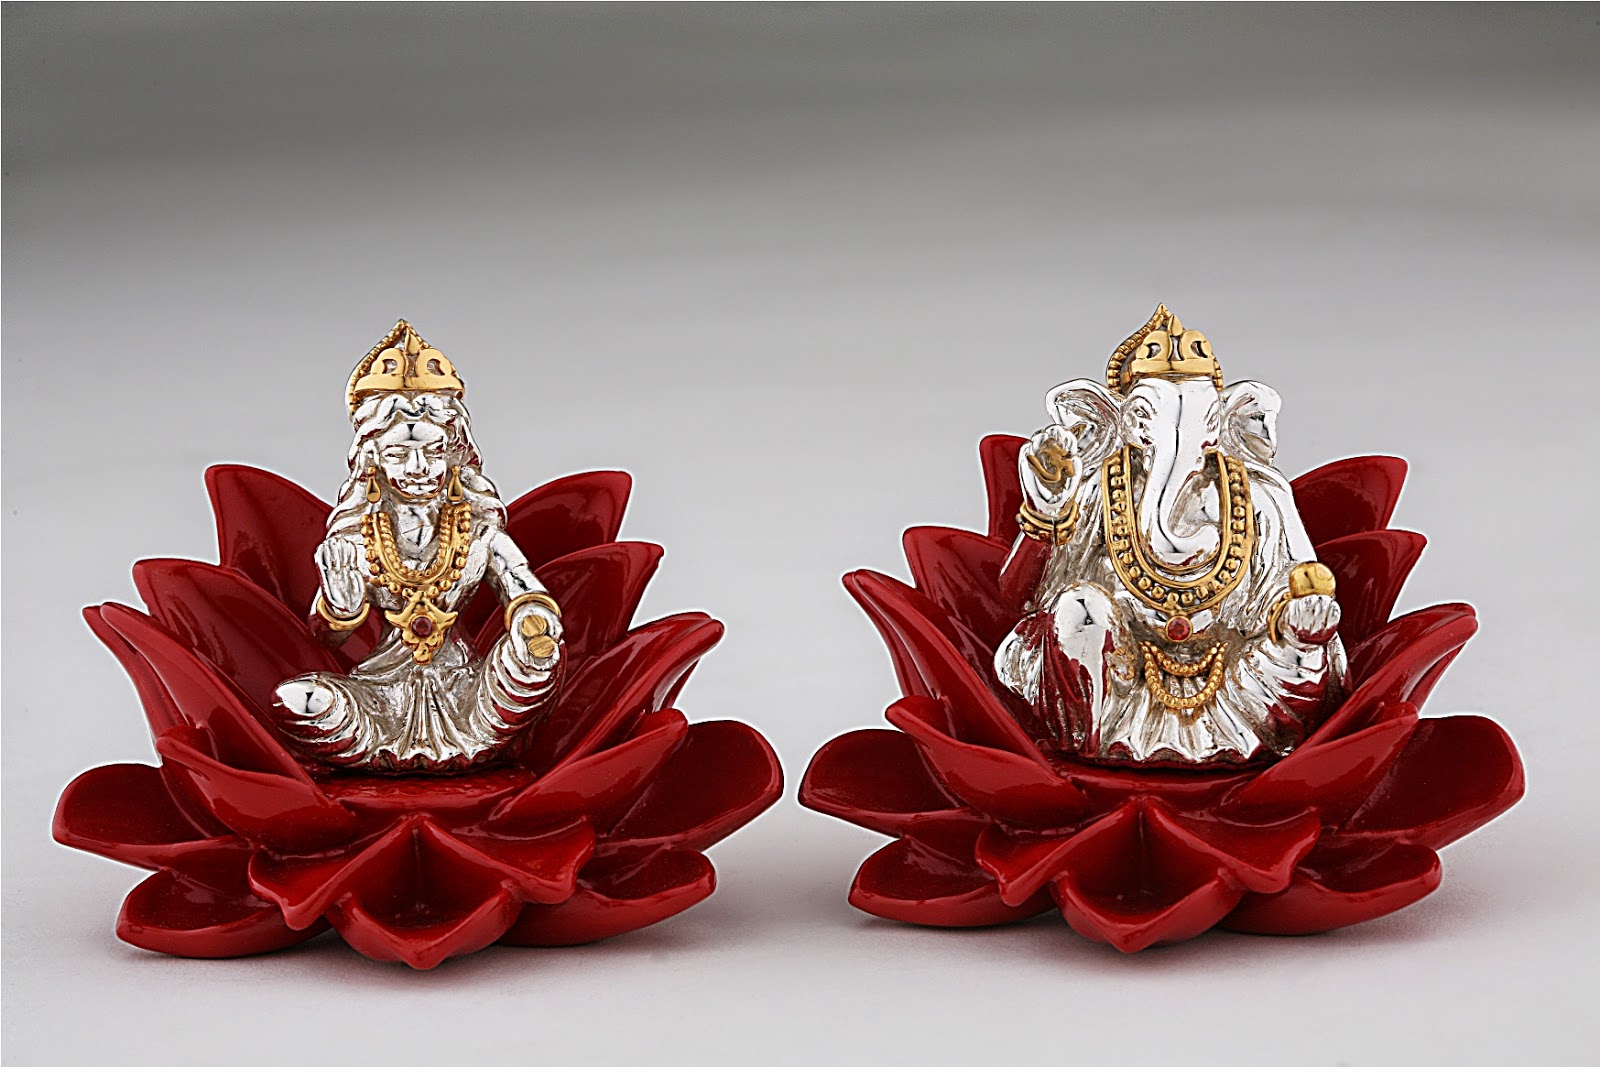 Frazer and Haws - Shopping For Pooja Accessories and Statues of Indian Gods in Silver, Gold or Crystals? This Store Is For You! concept Diyas